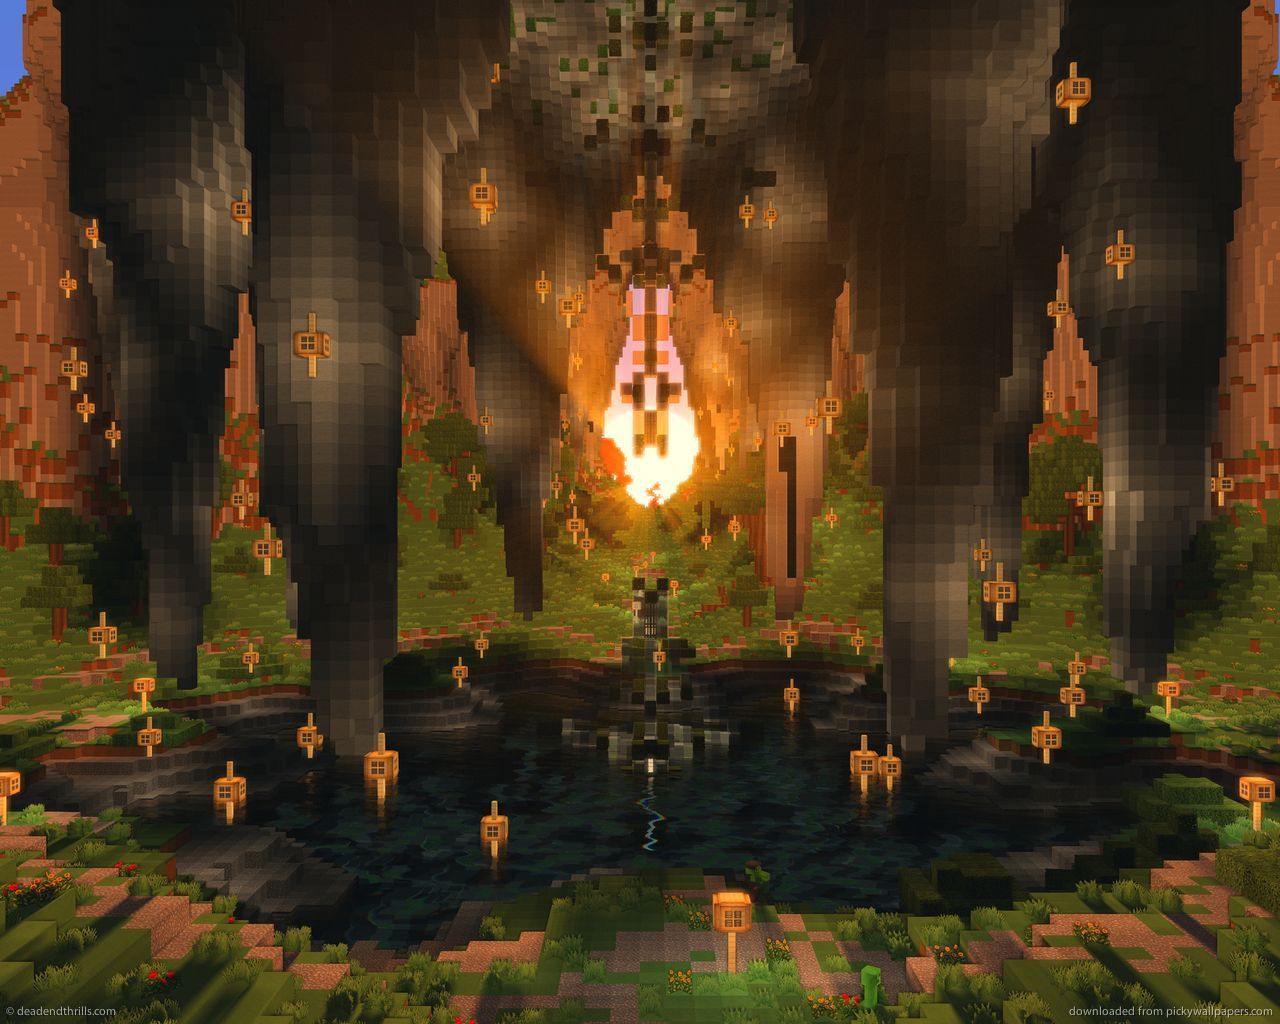 Download 1280x1024 Minecraft In The Temple Wallpaper